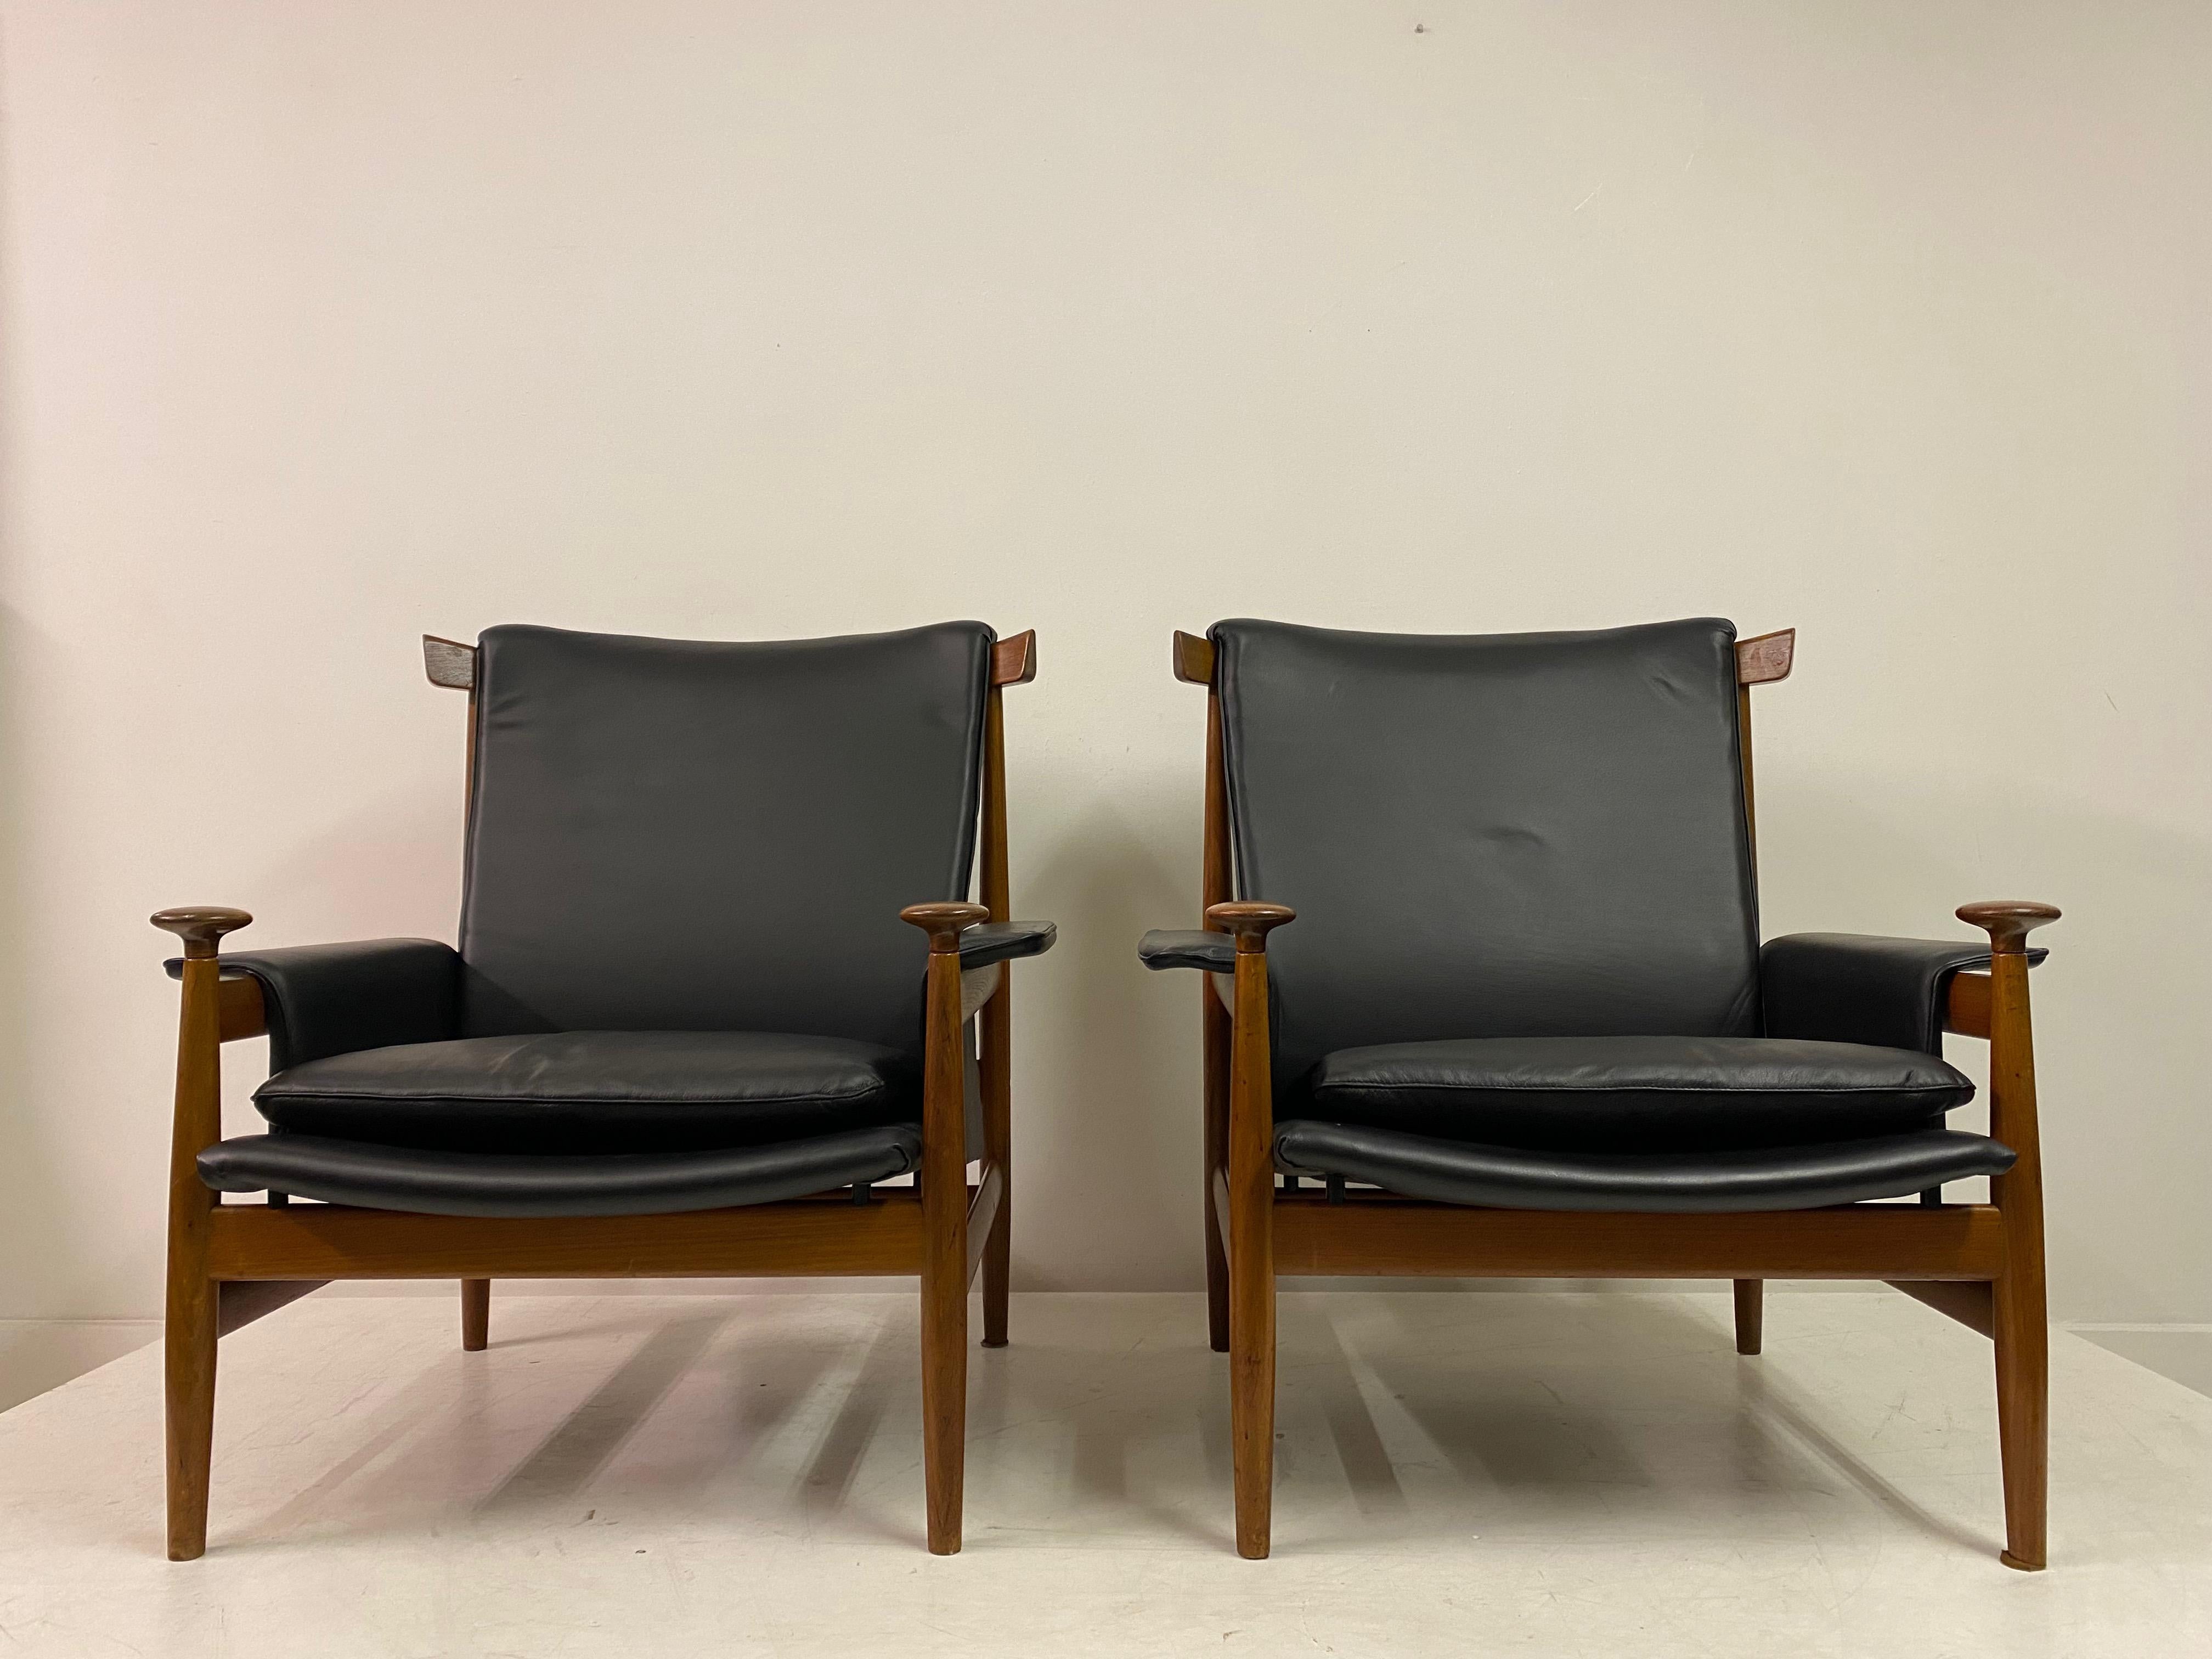 Pair of Bwana Model 152 armchairs

By Finn Juhl

For France and Son

Teak frames

Black leather upholstery recently done

Curved triangular wooden head rest

Pommel shaped hand rests

Denmark 1960s.